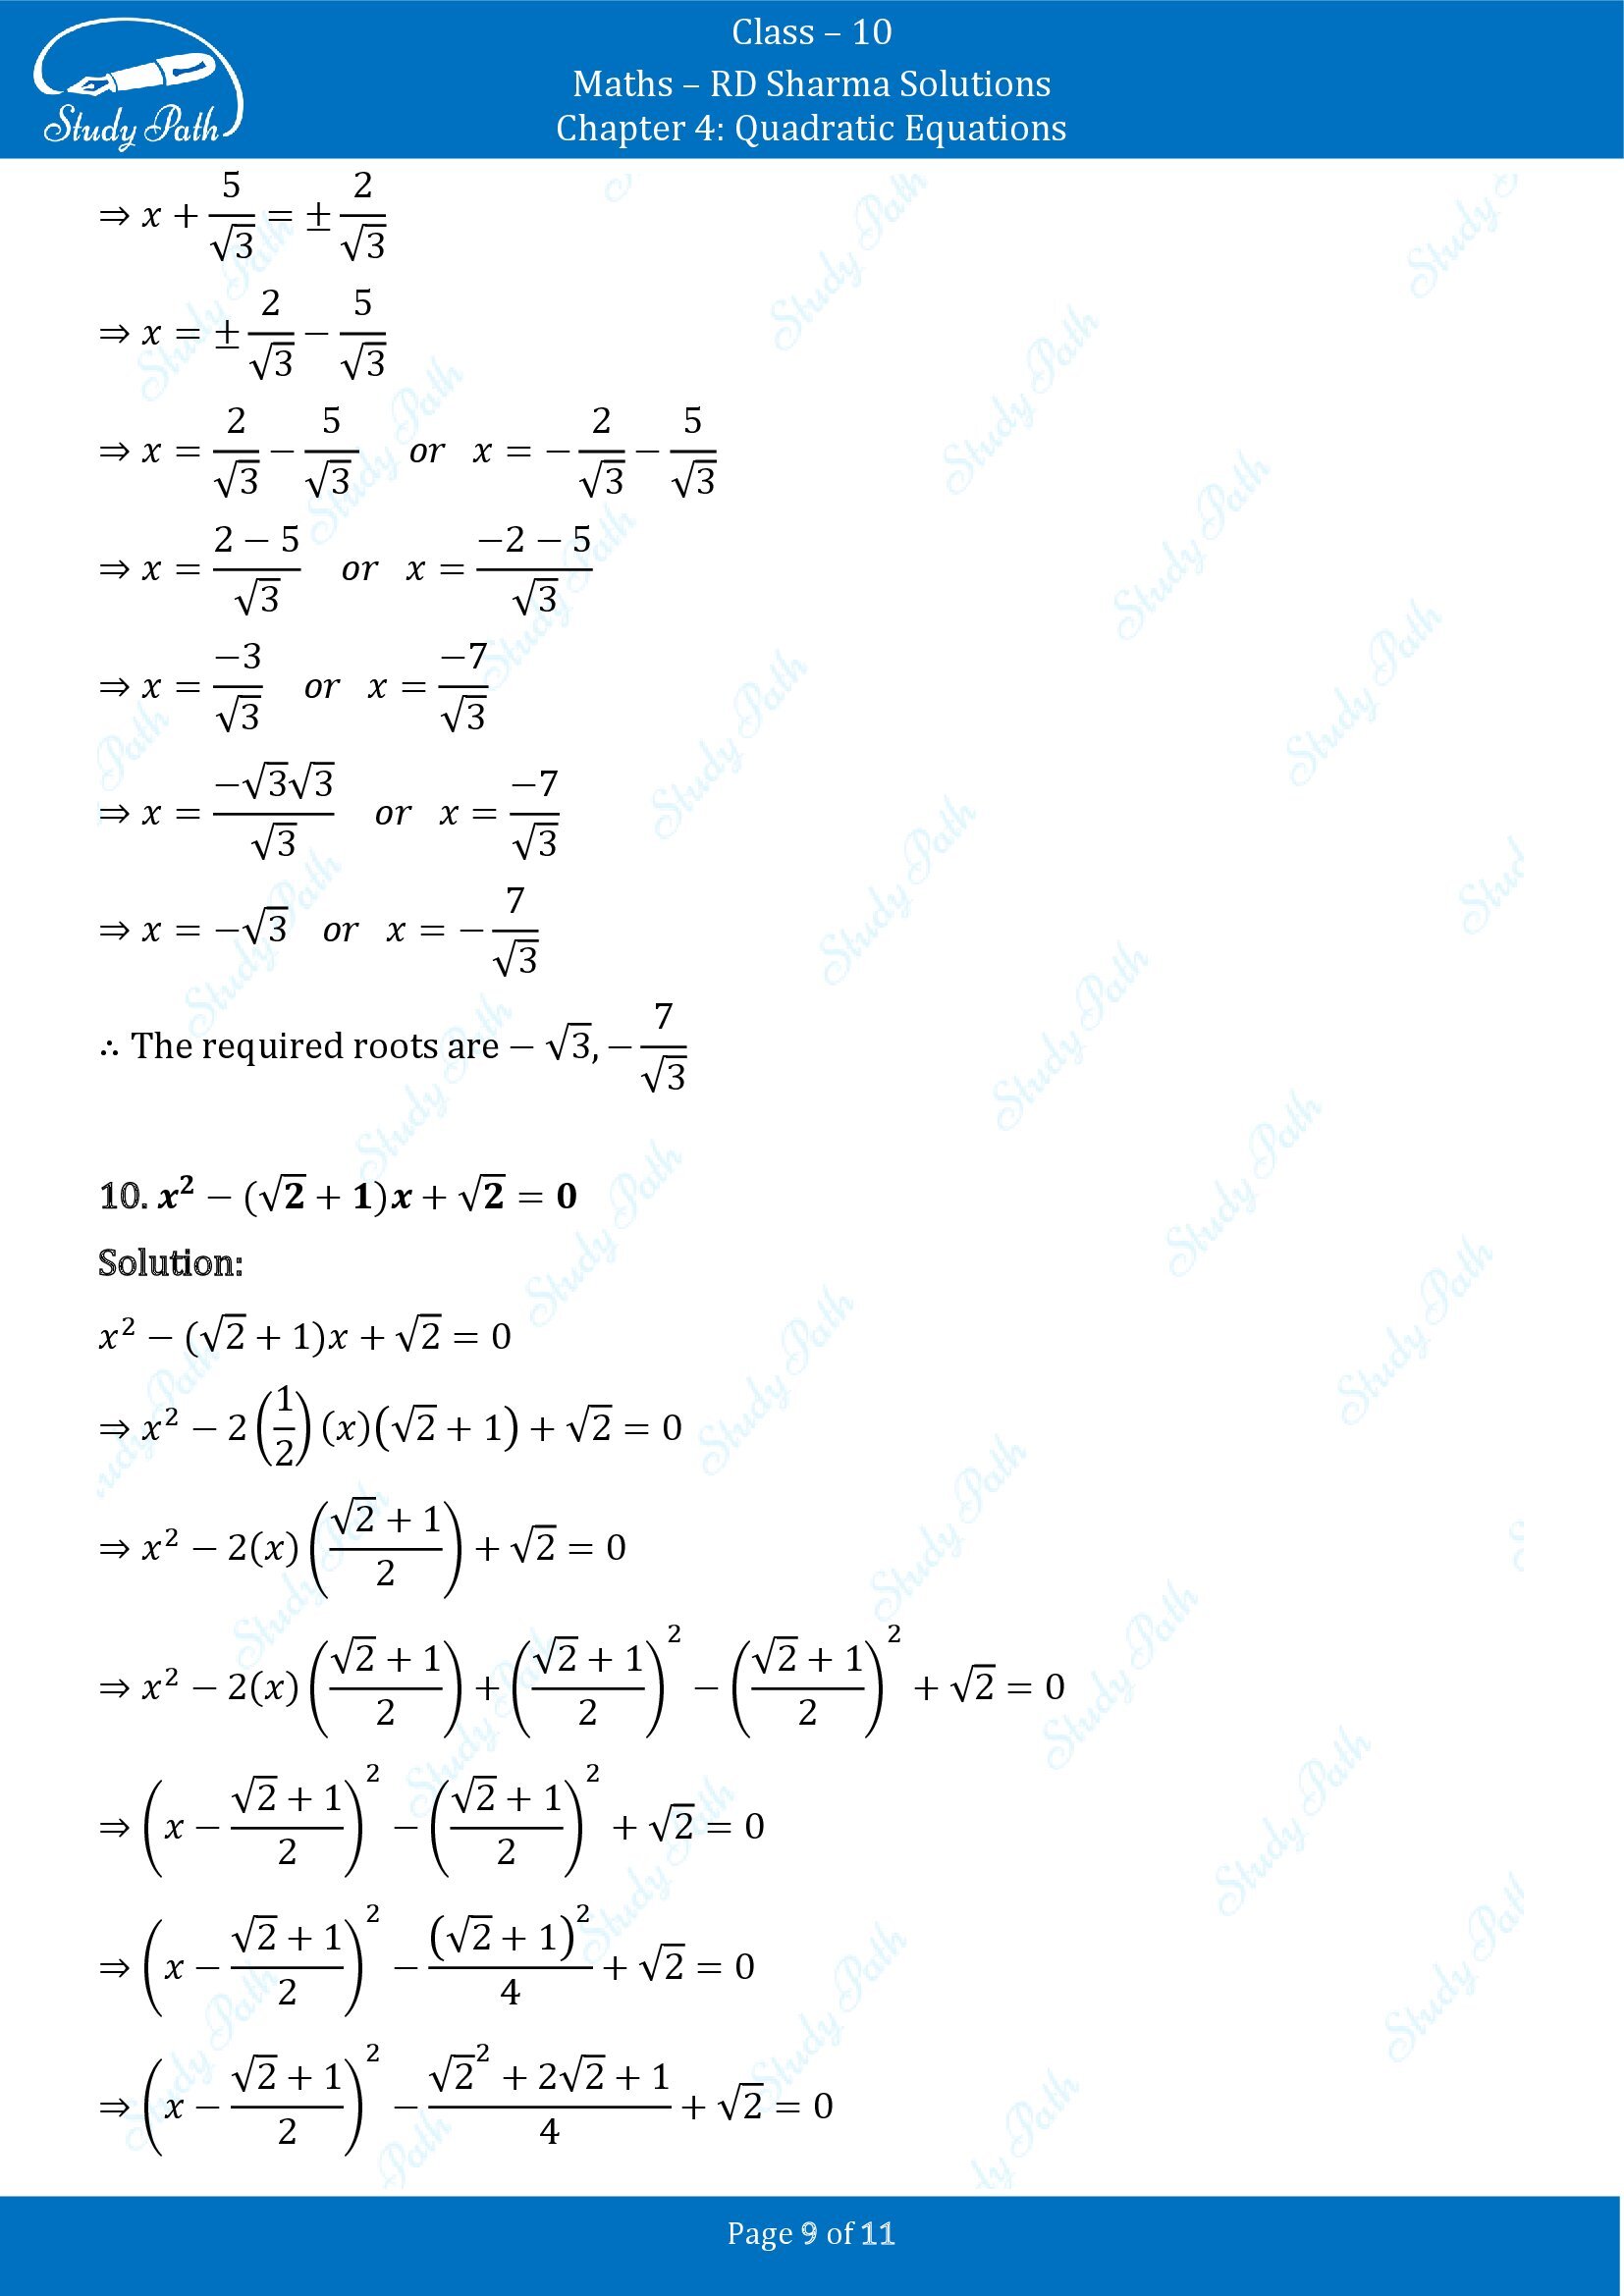 RD Sharma Solutions Class 10 Chapter 4 Quadratic Equations Exercise 4.4 00009